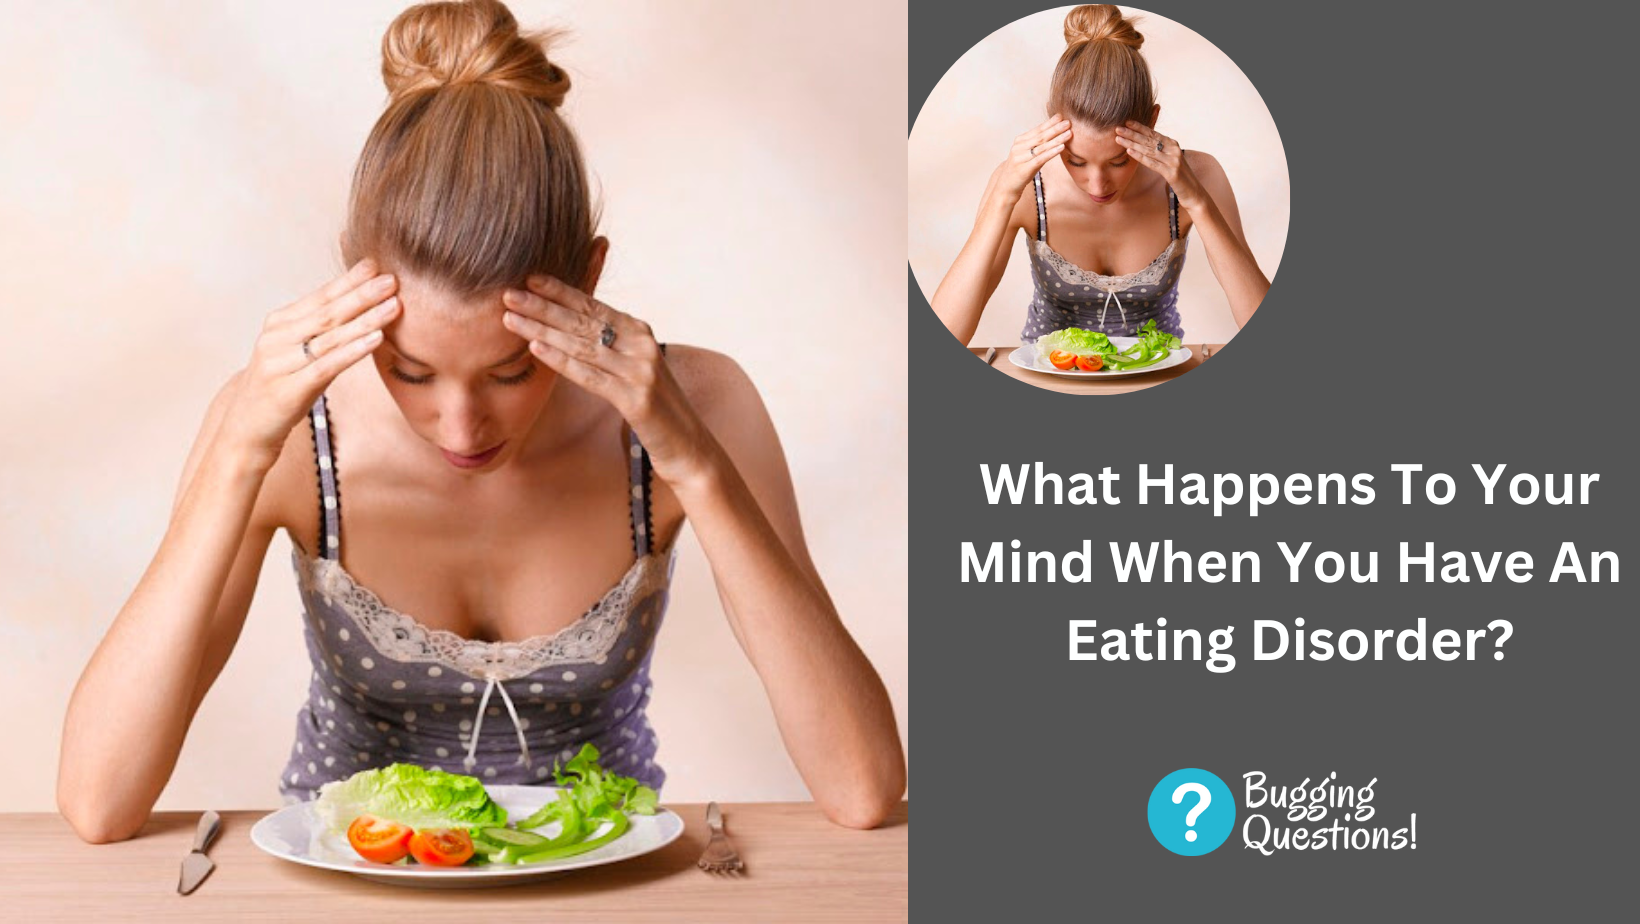 What Happens To Your Mind When You Have An Eating Disorder?